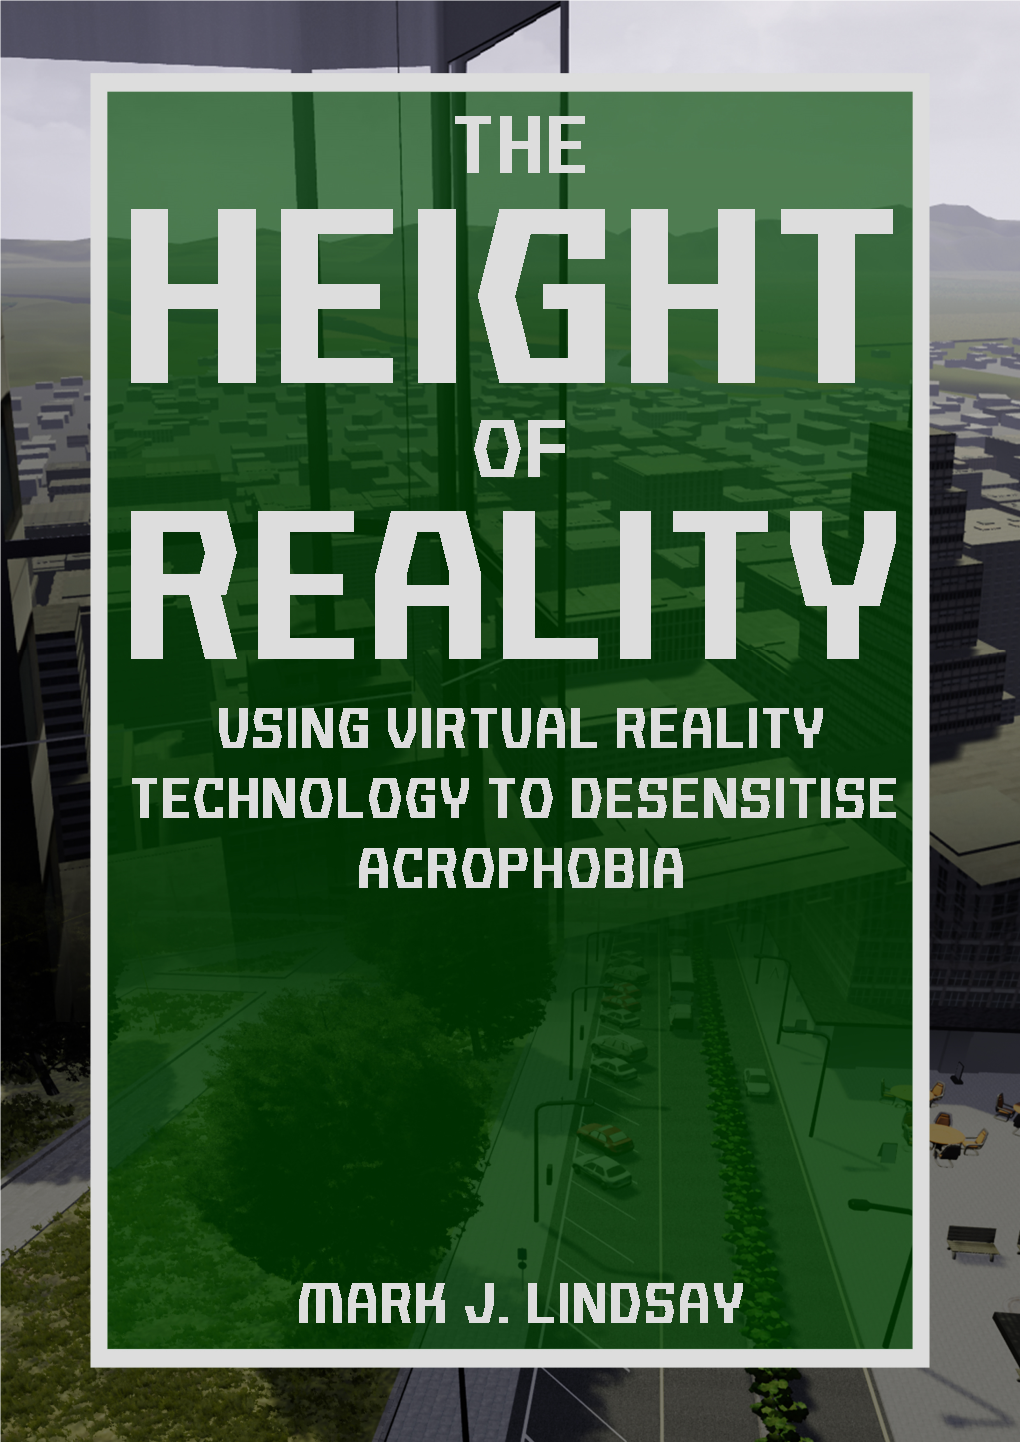 THE HEIGHT of REALITY Using Virtual Reality Technology to Desensitise Acrophobia